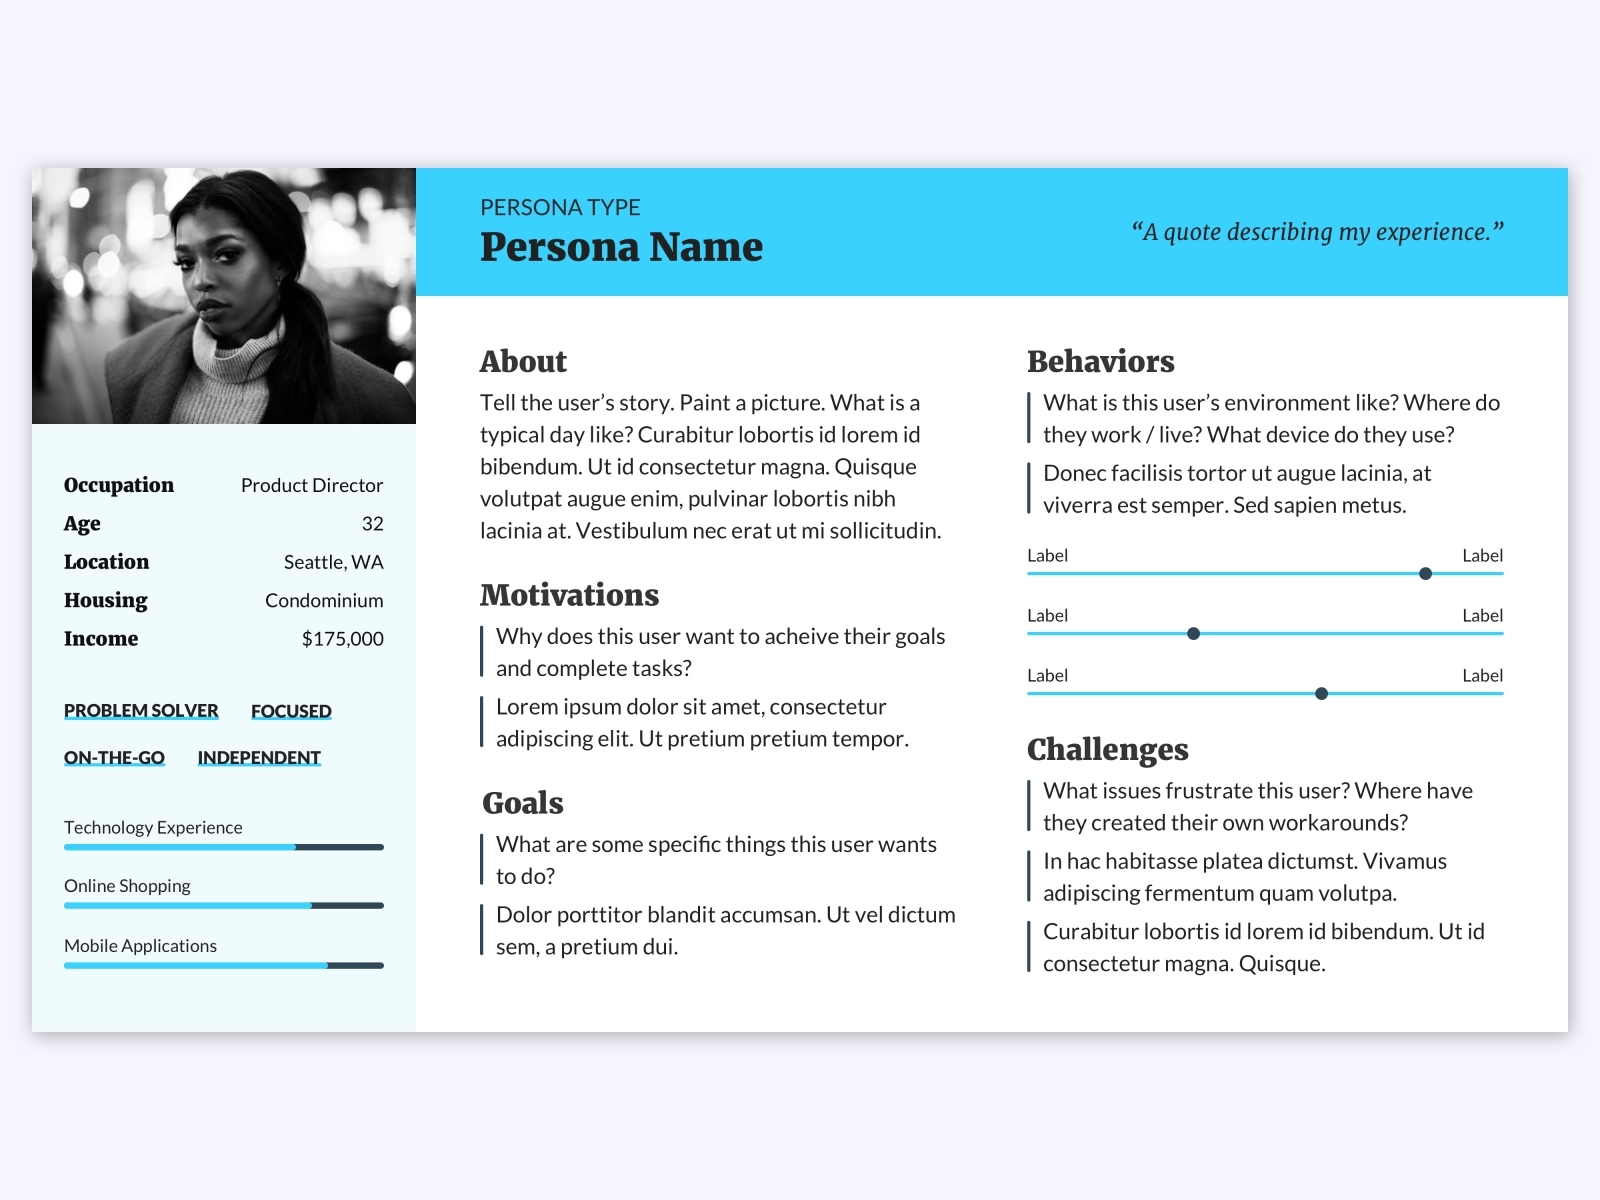 Persona Template by Kat G on Dribbble